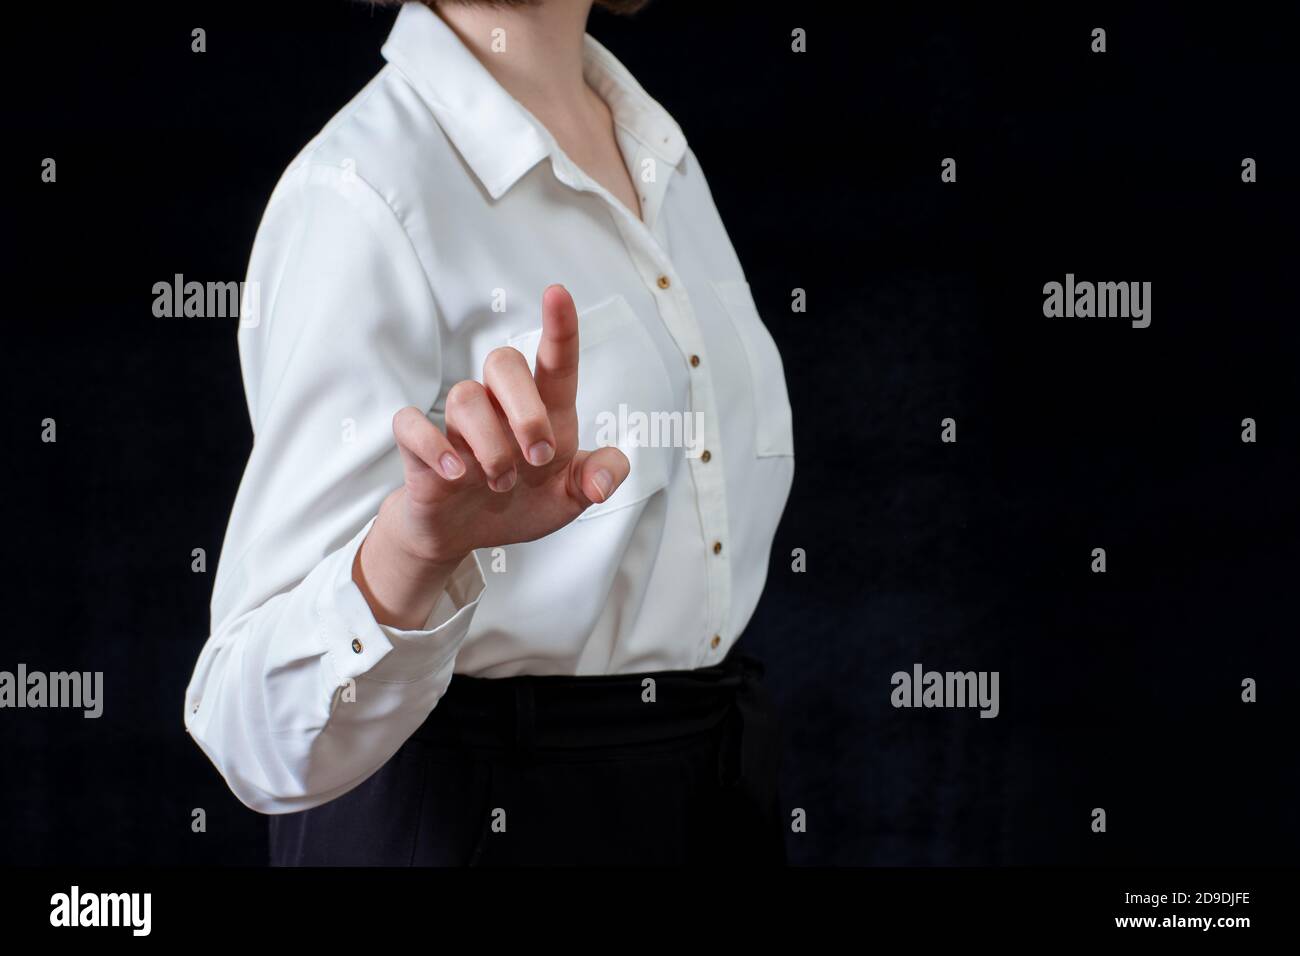 Businesswoman in front of visual touchscreen, isolated on black background. Business concept. Online learning Stock Photo